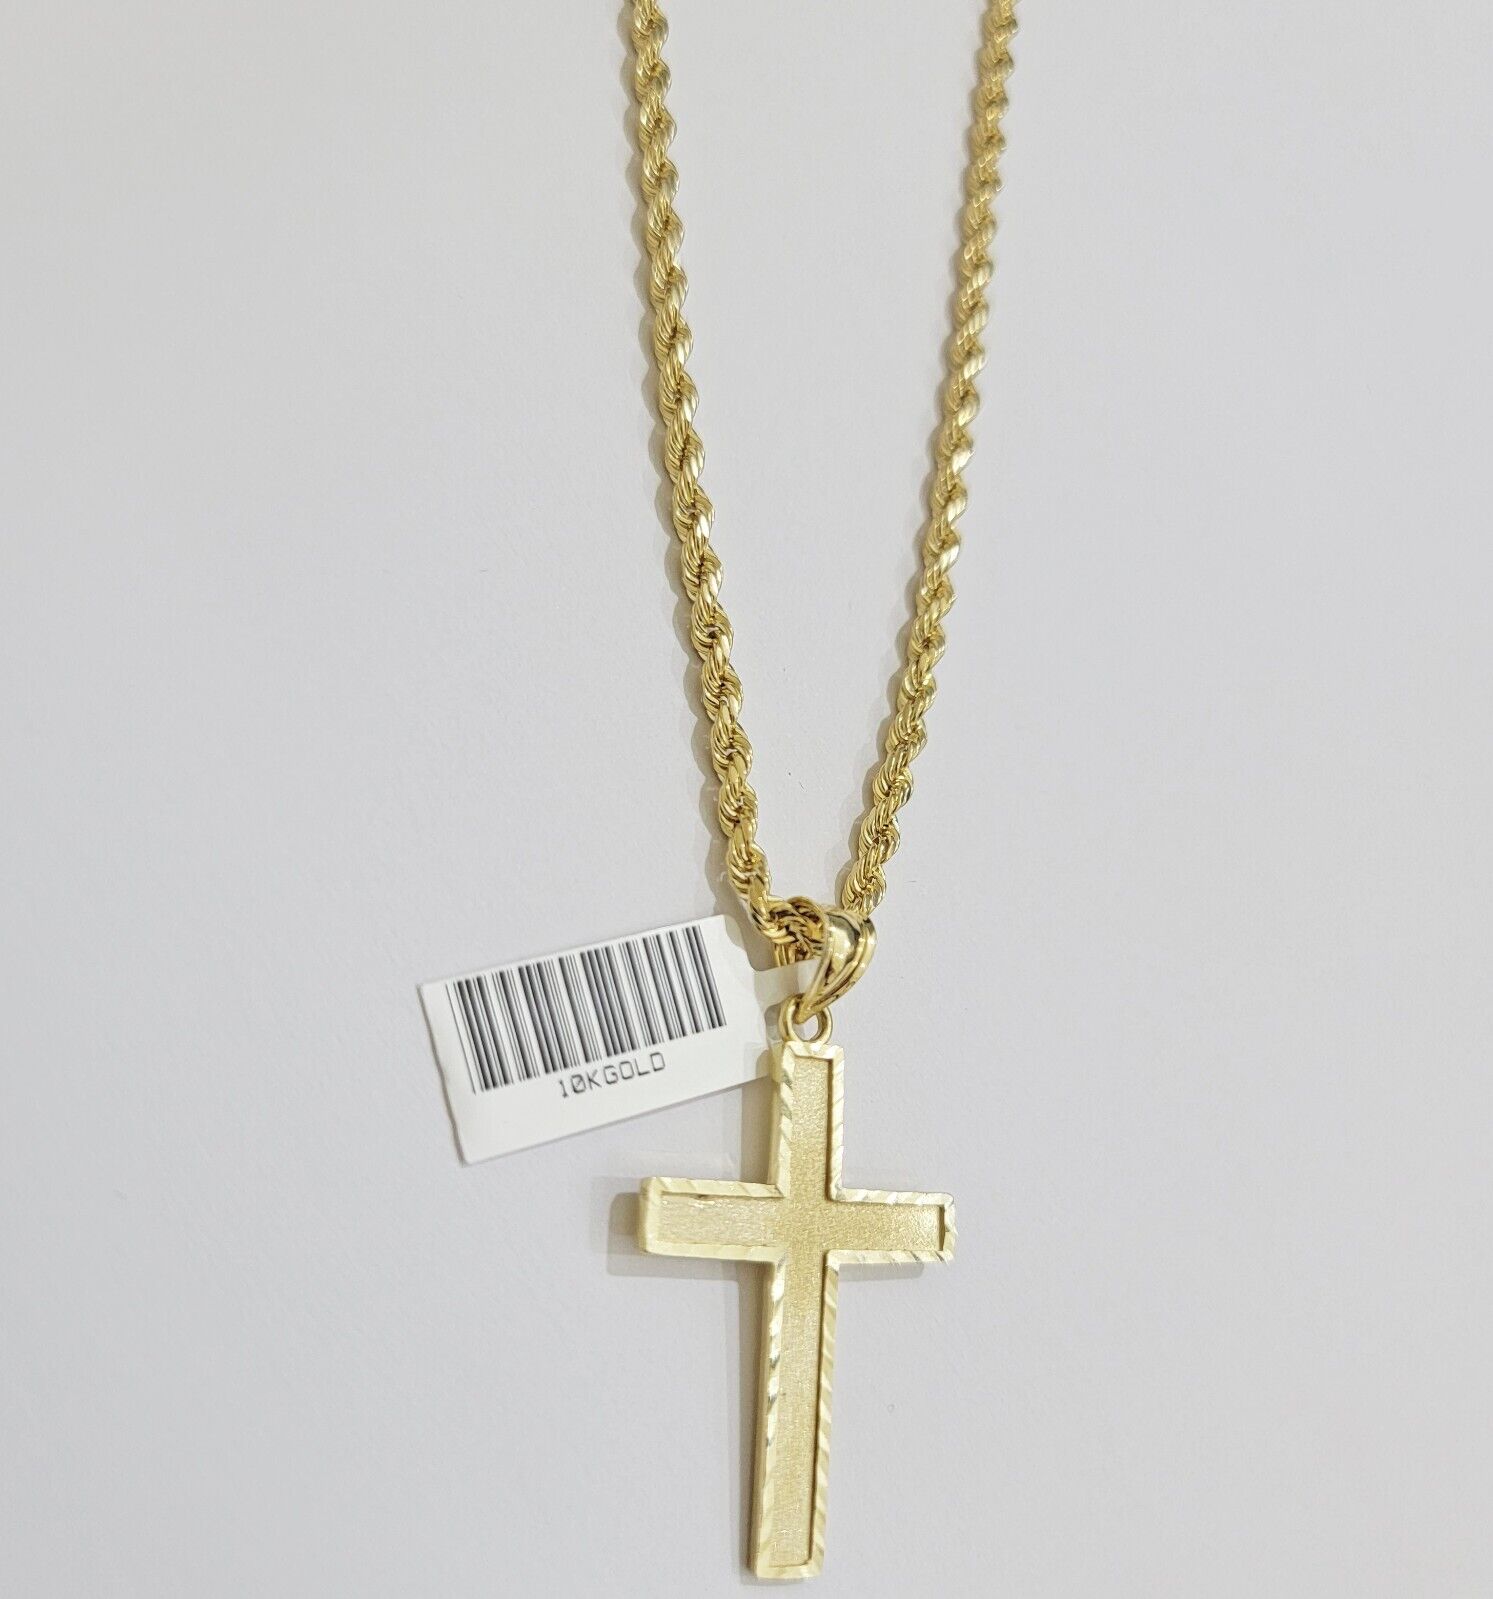 10k Yellow Gold Rope Chain & Cross Charm Set REAL 10KT 28 Inch necklace pendant